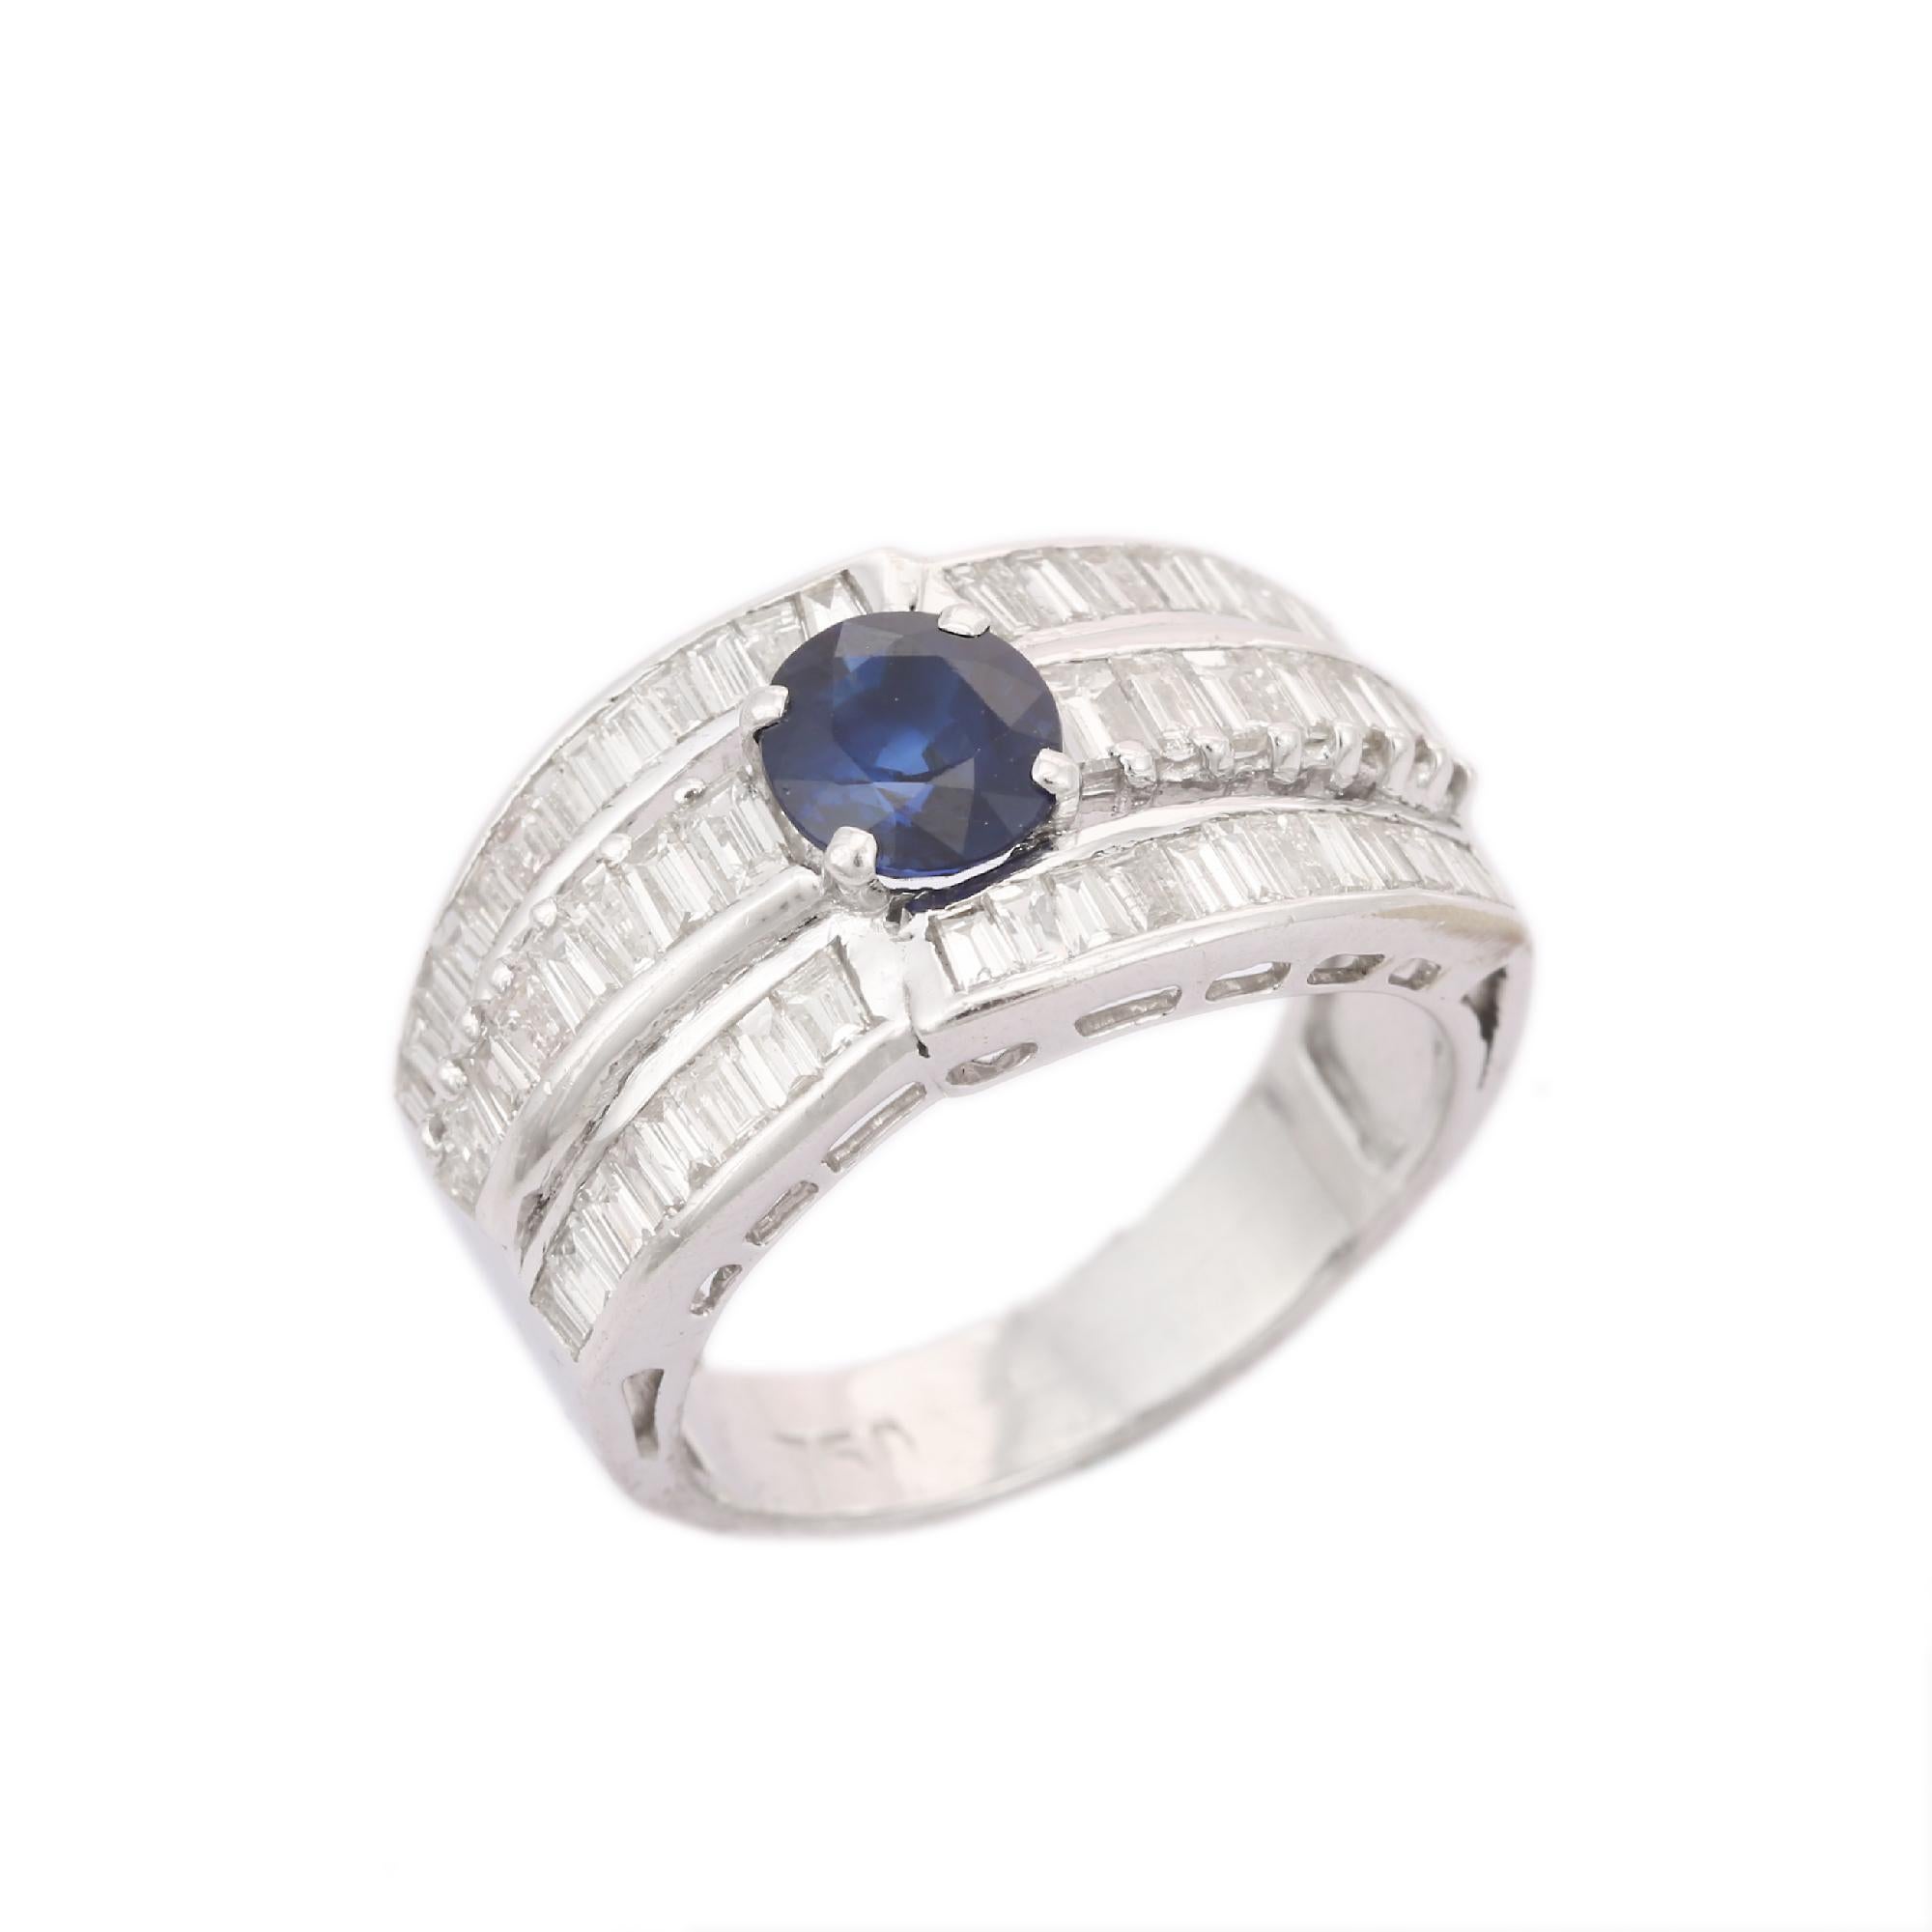 For Sale:  Blue Sapphire Diamond Thick Engagement Band Style Ring in 18kt Solid White Gold 2